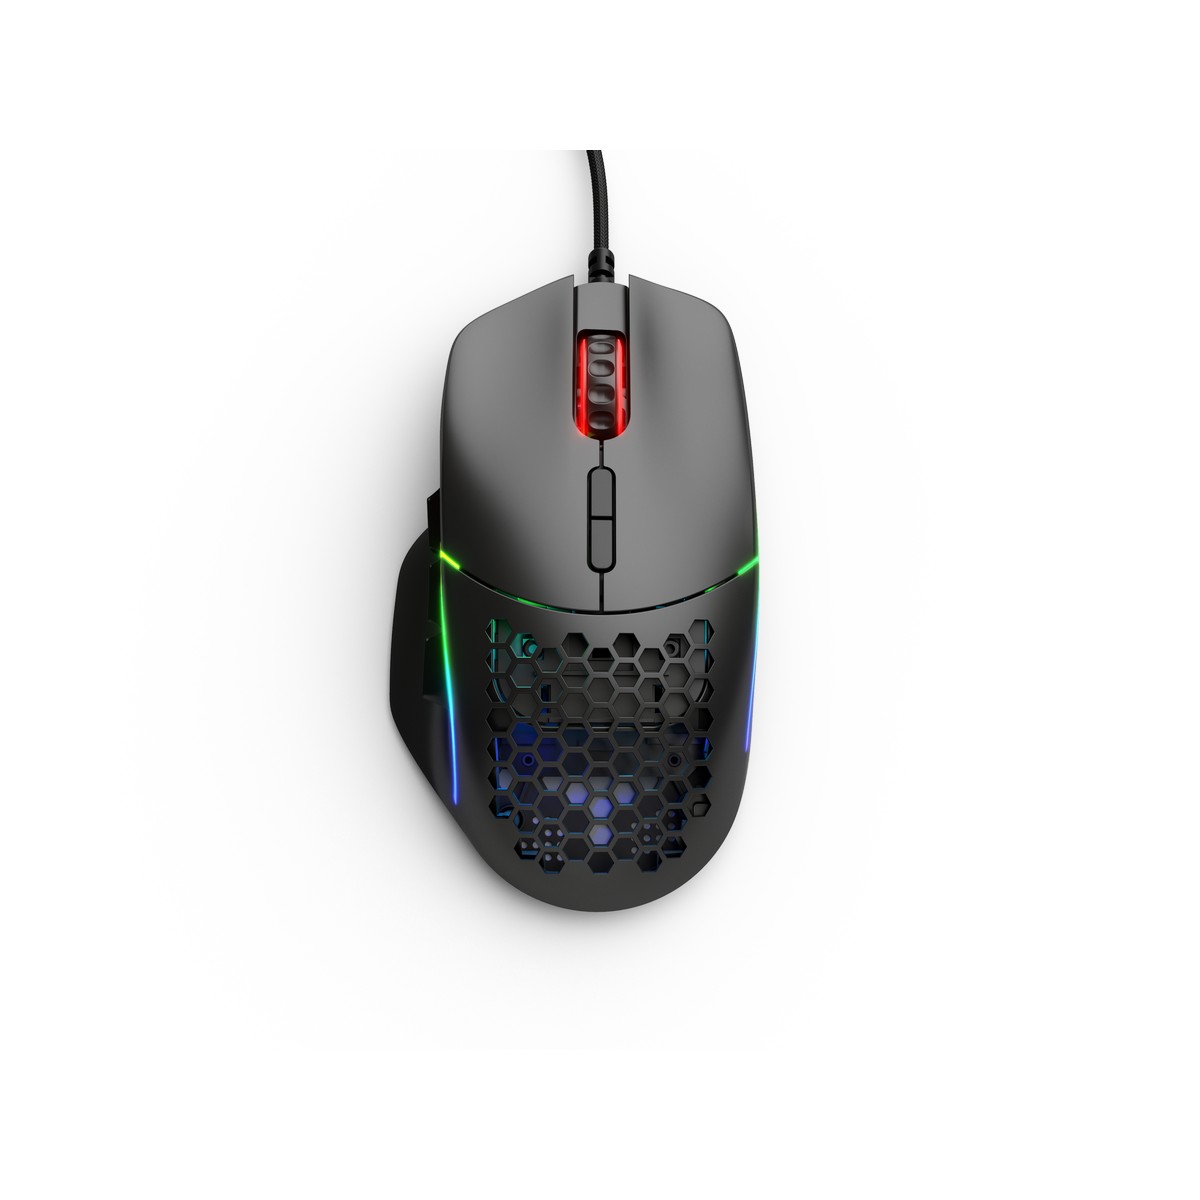 Glorious - Glorious Model I USB RGB Lightweight Gaming Mouse - Matte Black (GLO-MS-I-MB)